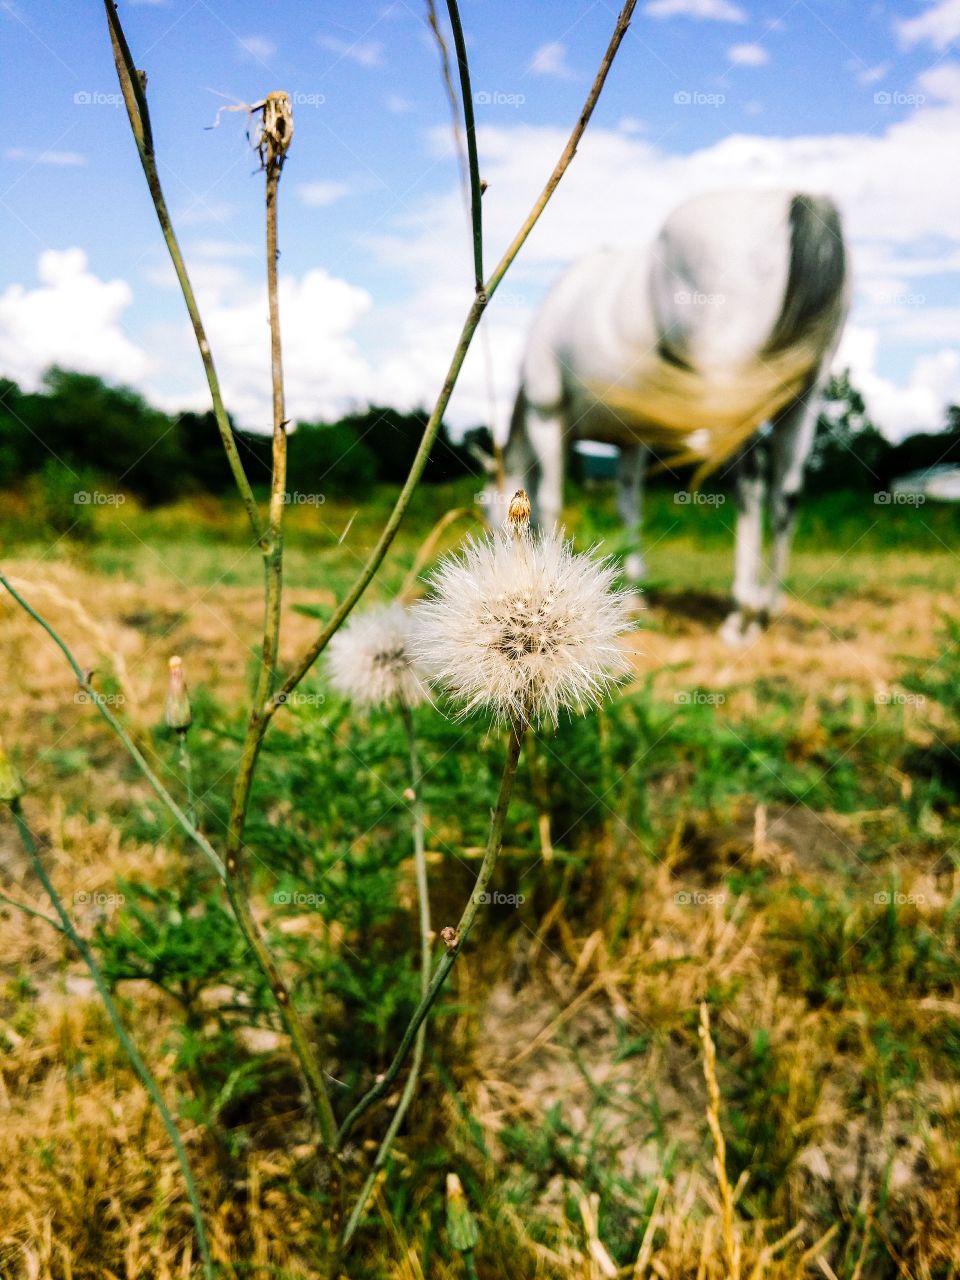 Dandelions with a gray horse in the background in summer glorious mother nature